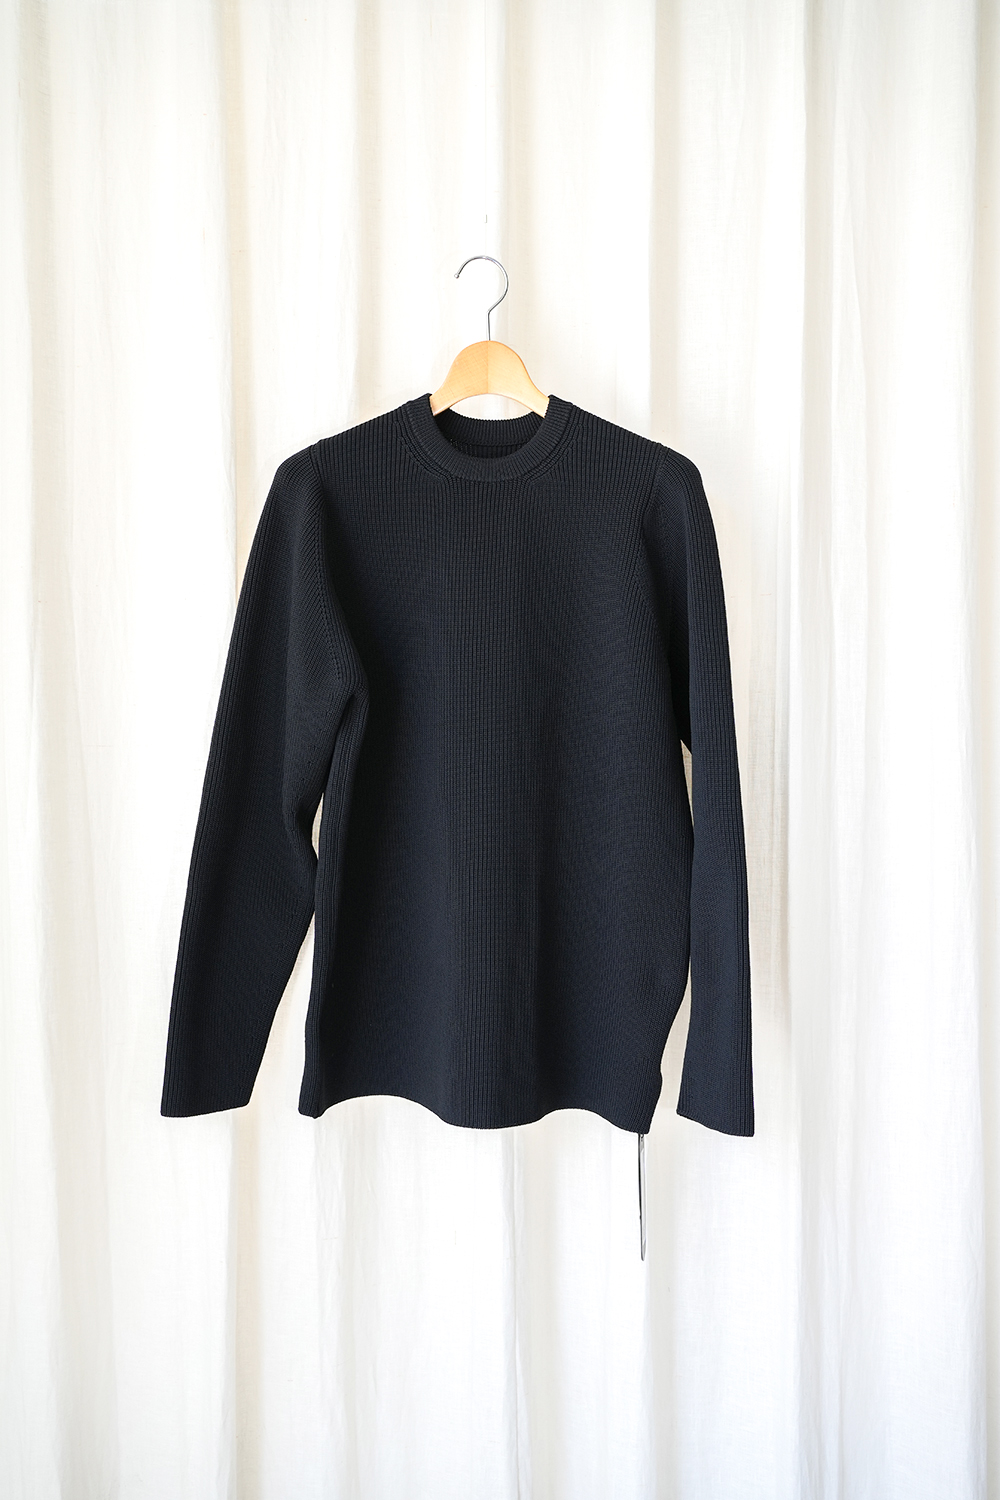 TEATORA」hover layer CARTRIDGE KNIT CREW 7G | ANOTHER LOUNGE